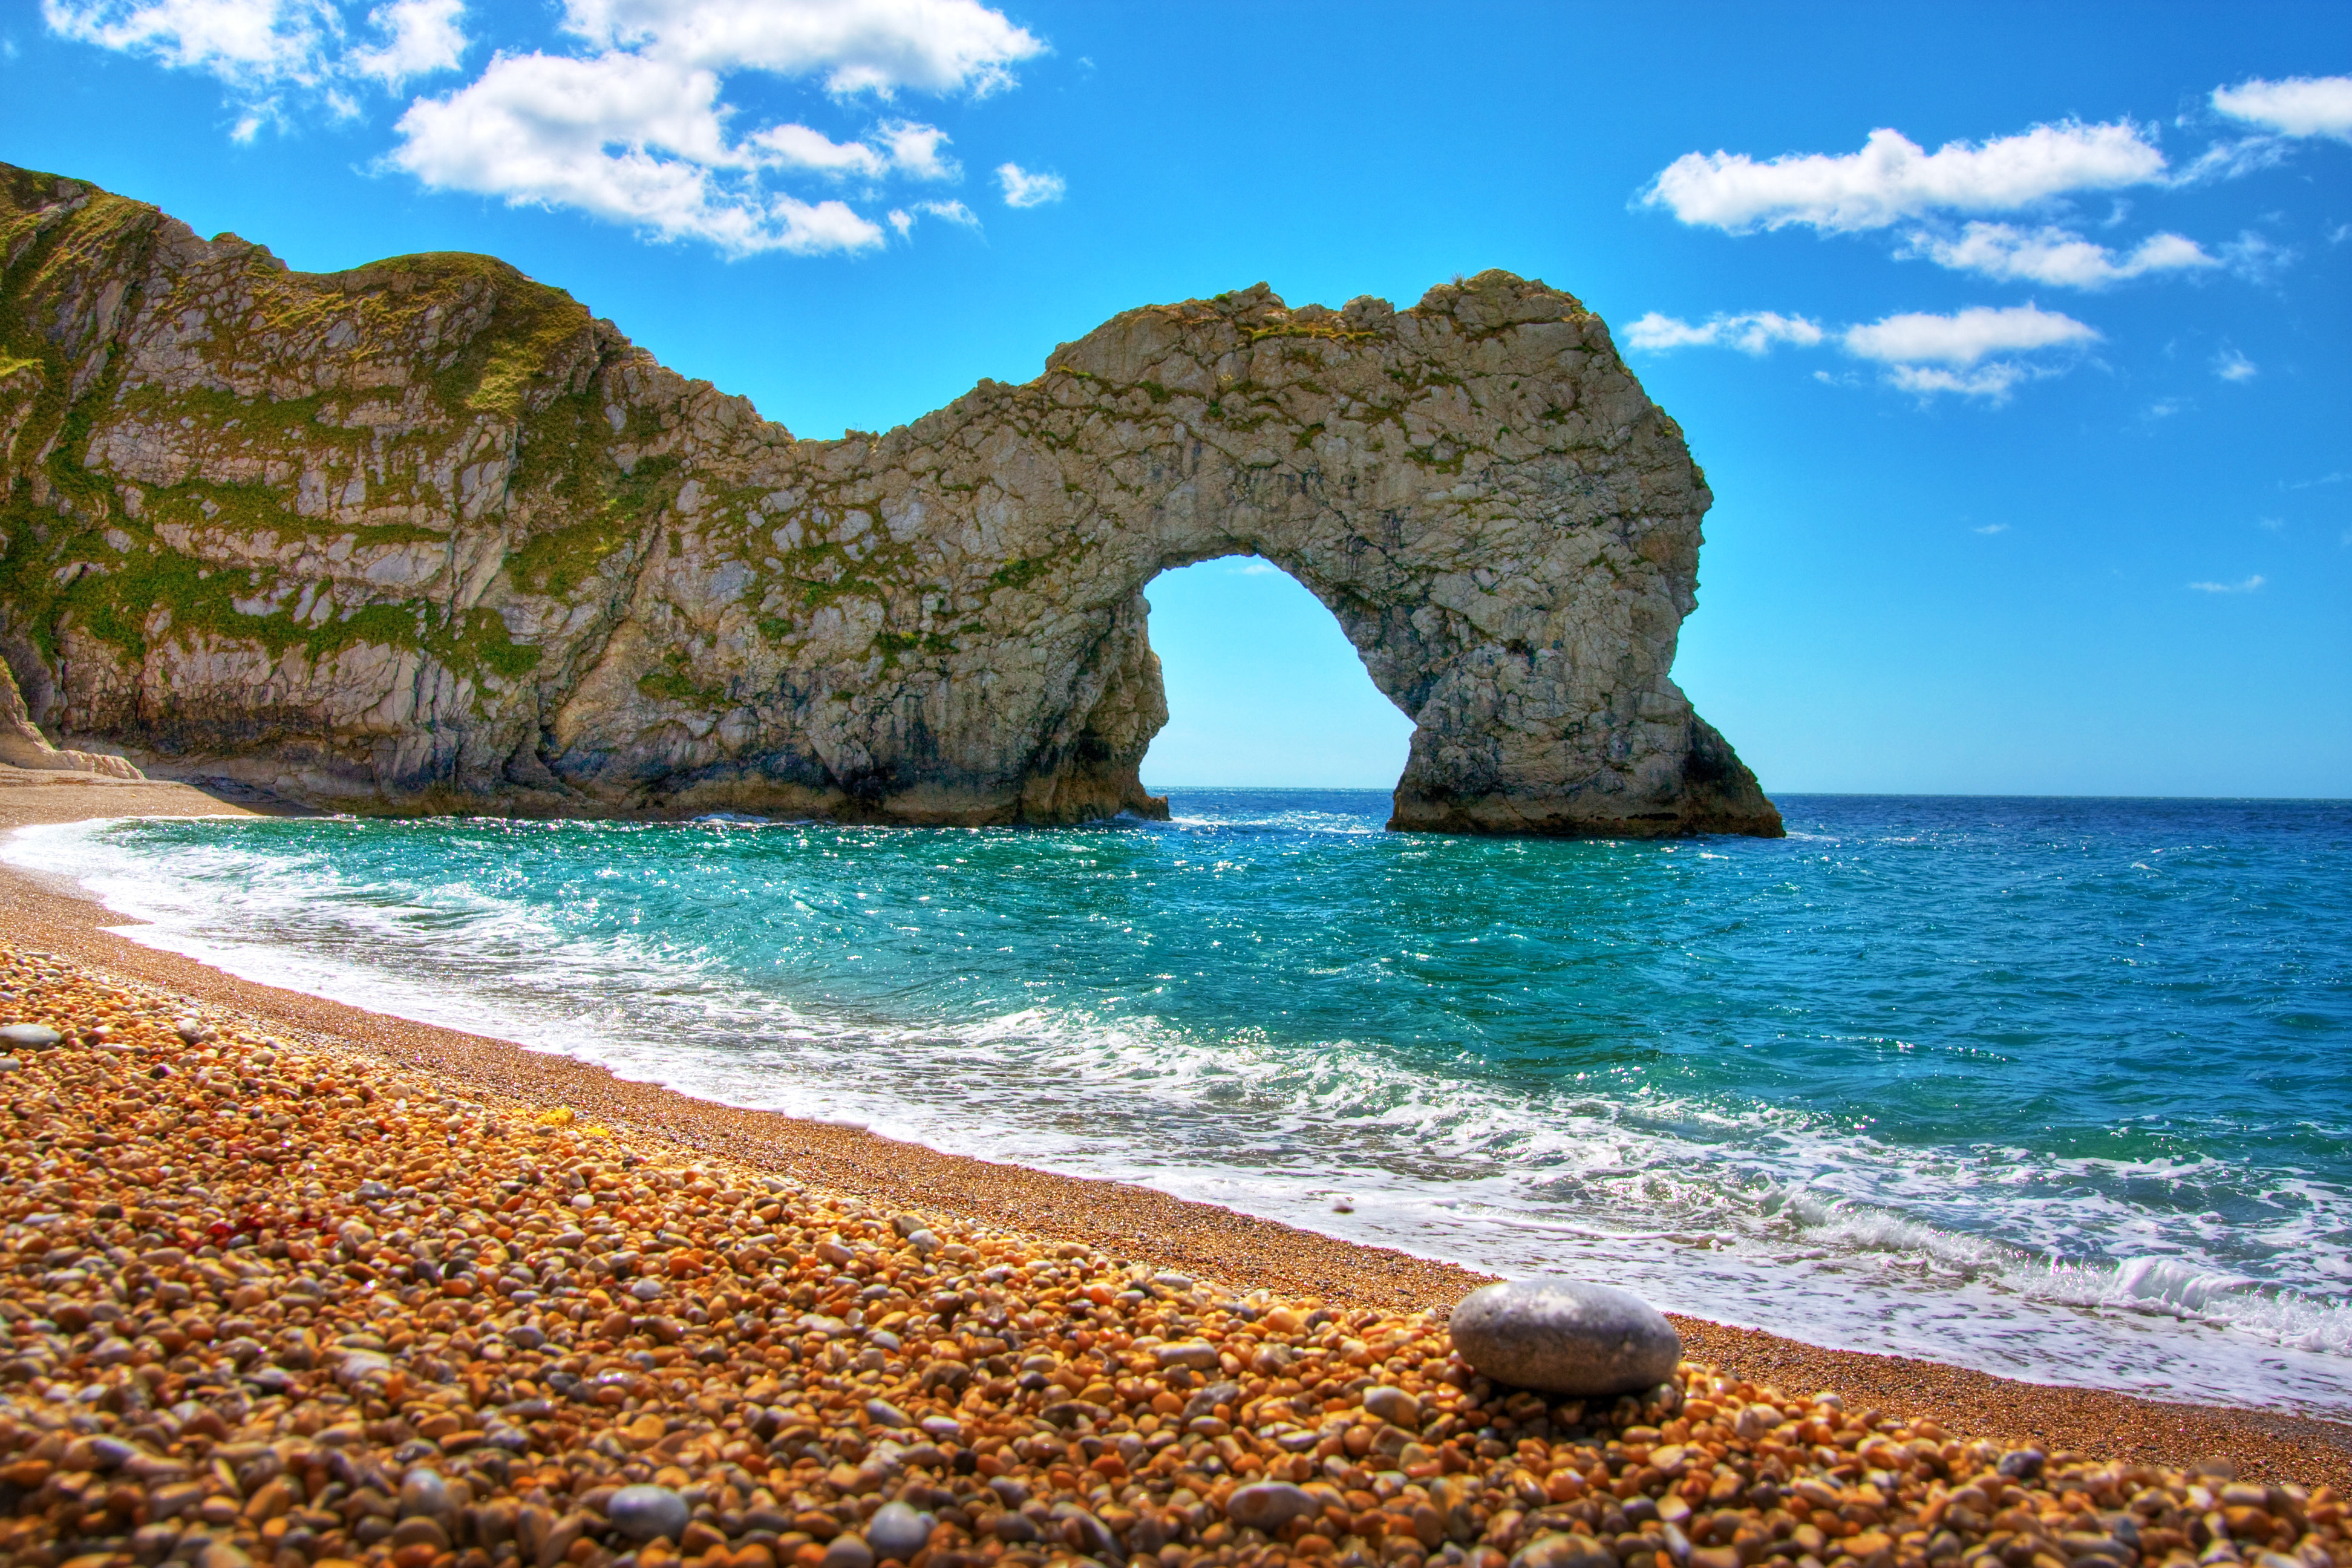 durdle door hdr by Paul Tomlin licensed under CC BY 2.0